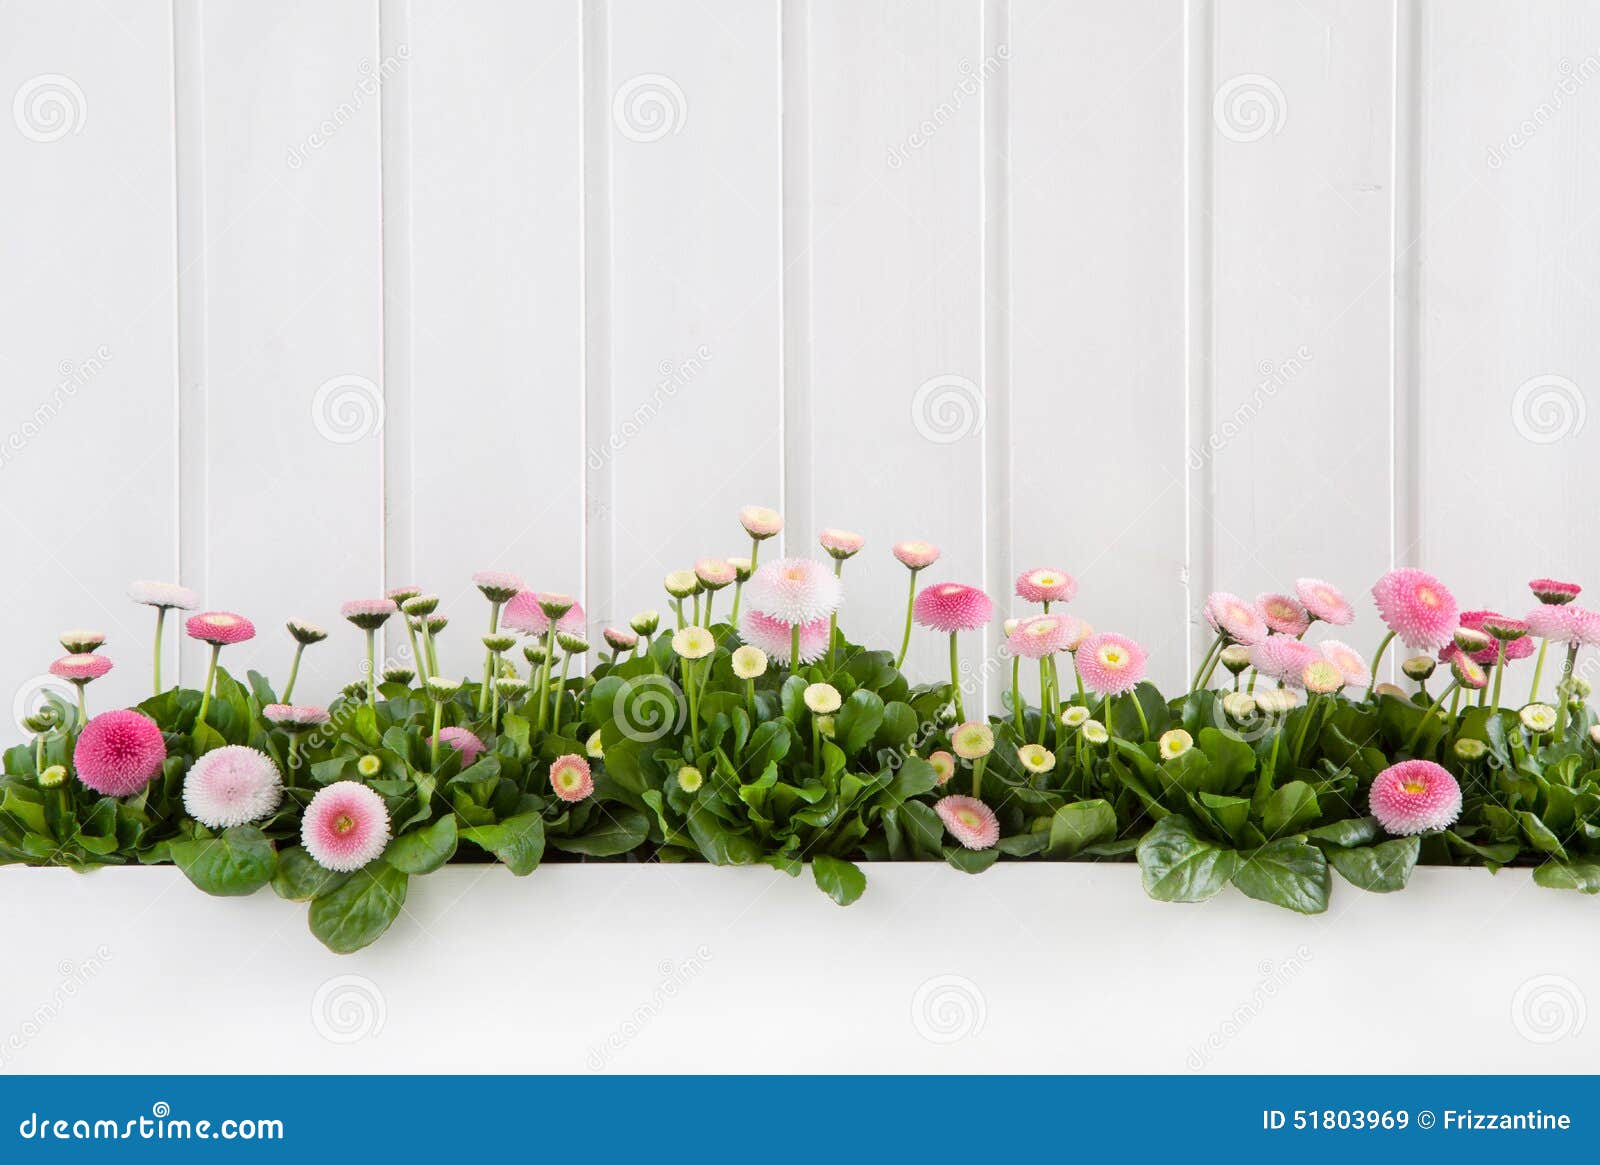 white wooden spring background with pink daisy flowers.